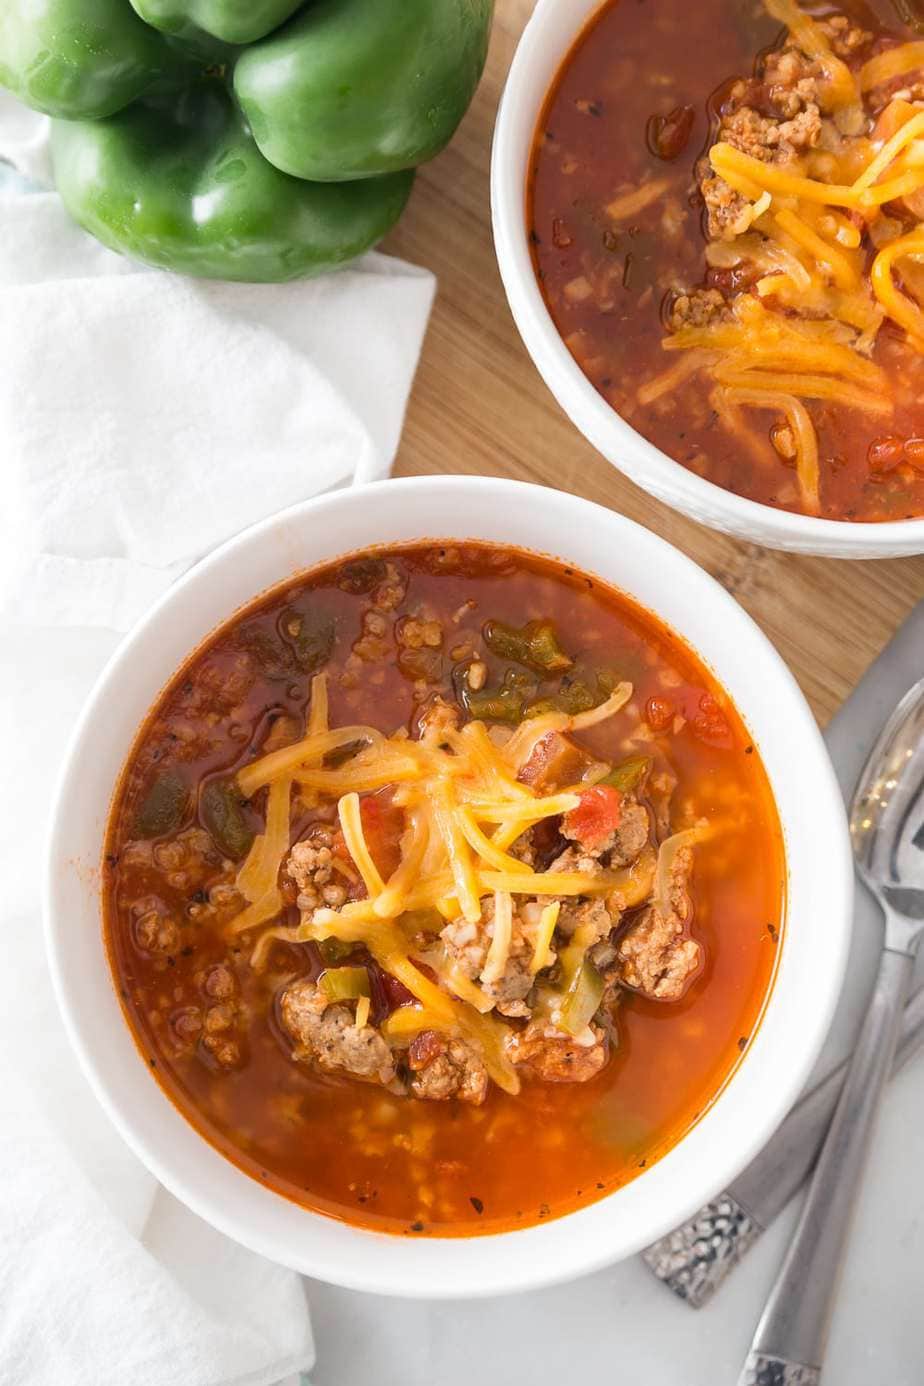 https://confessionsofafitfoodie.com/wp-content/uploads/2018/10/Low-Carb-Stuffed-Pepper-Soup-29.jpg